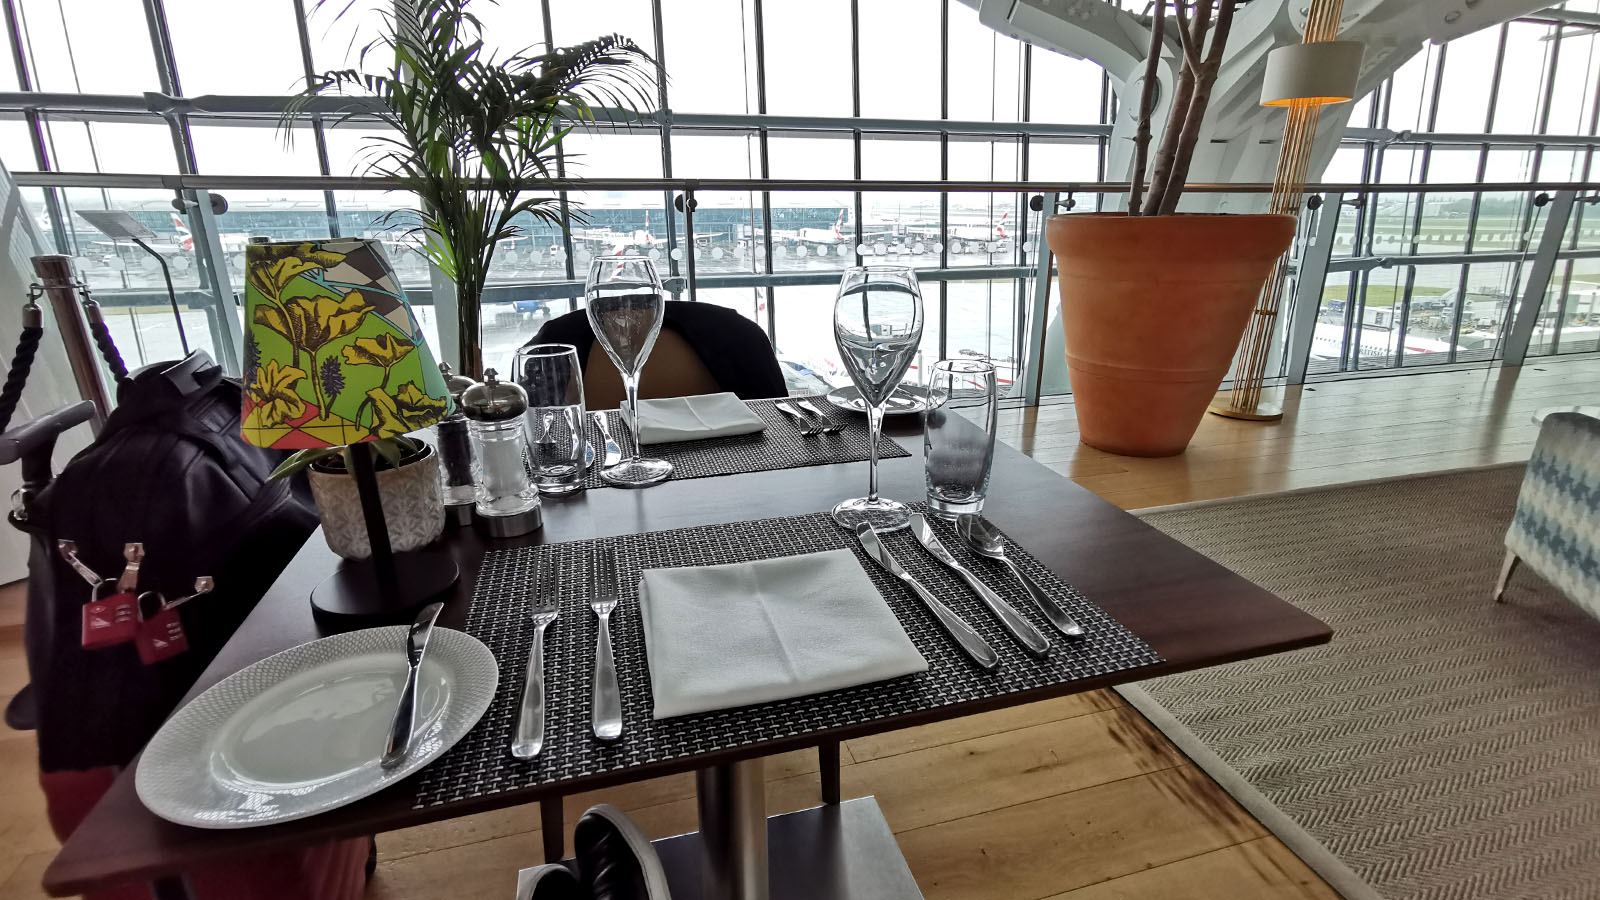 Enjoy a meal in the BA Concorde Room at London Heathrow